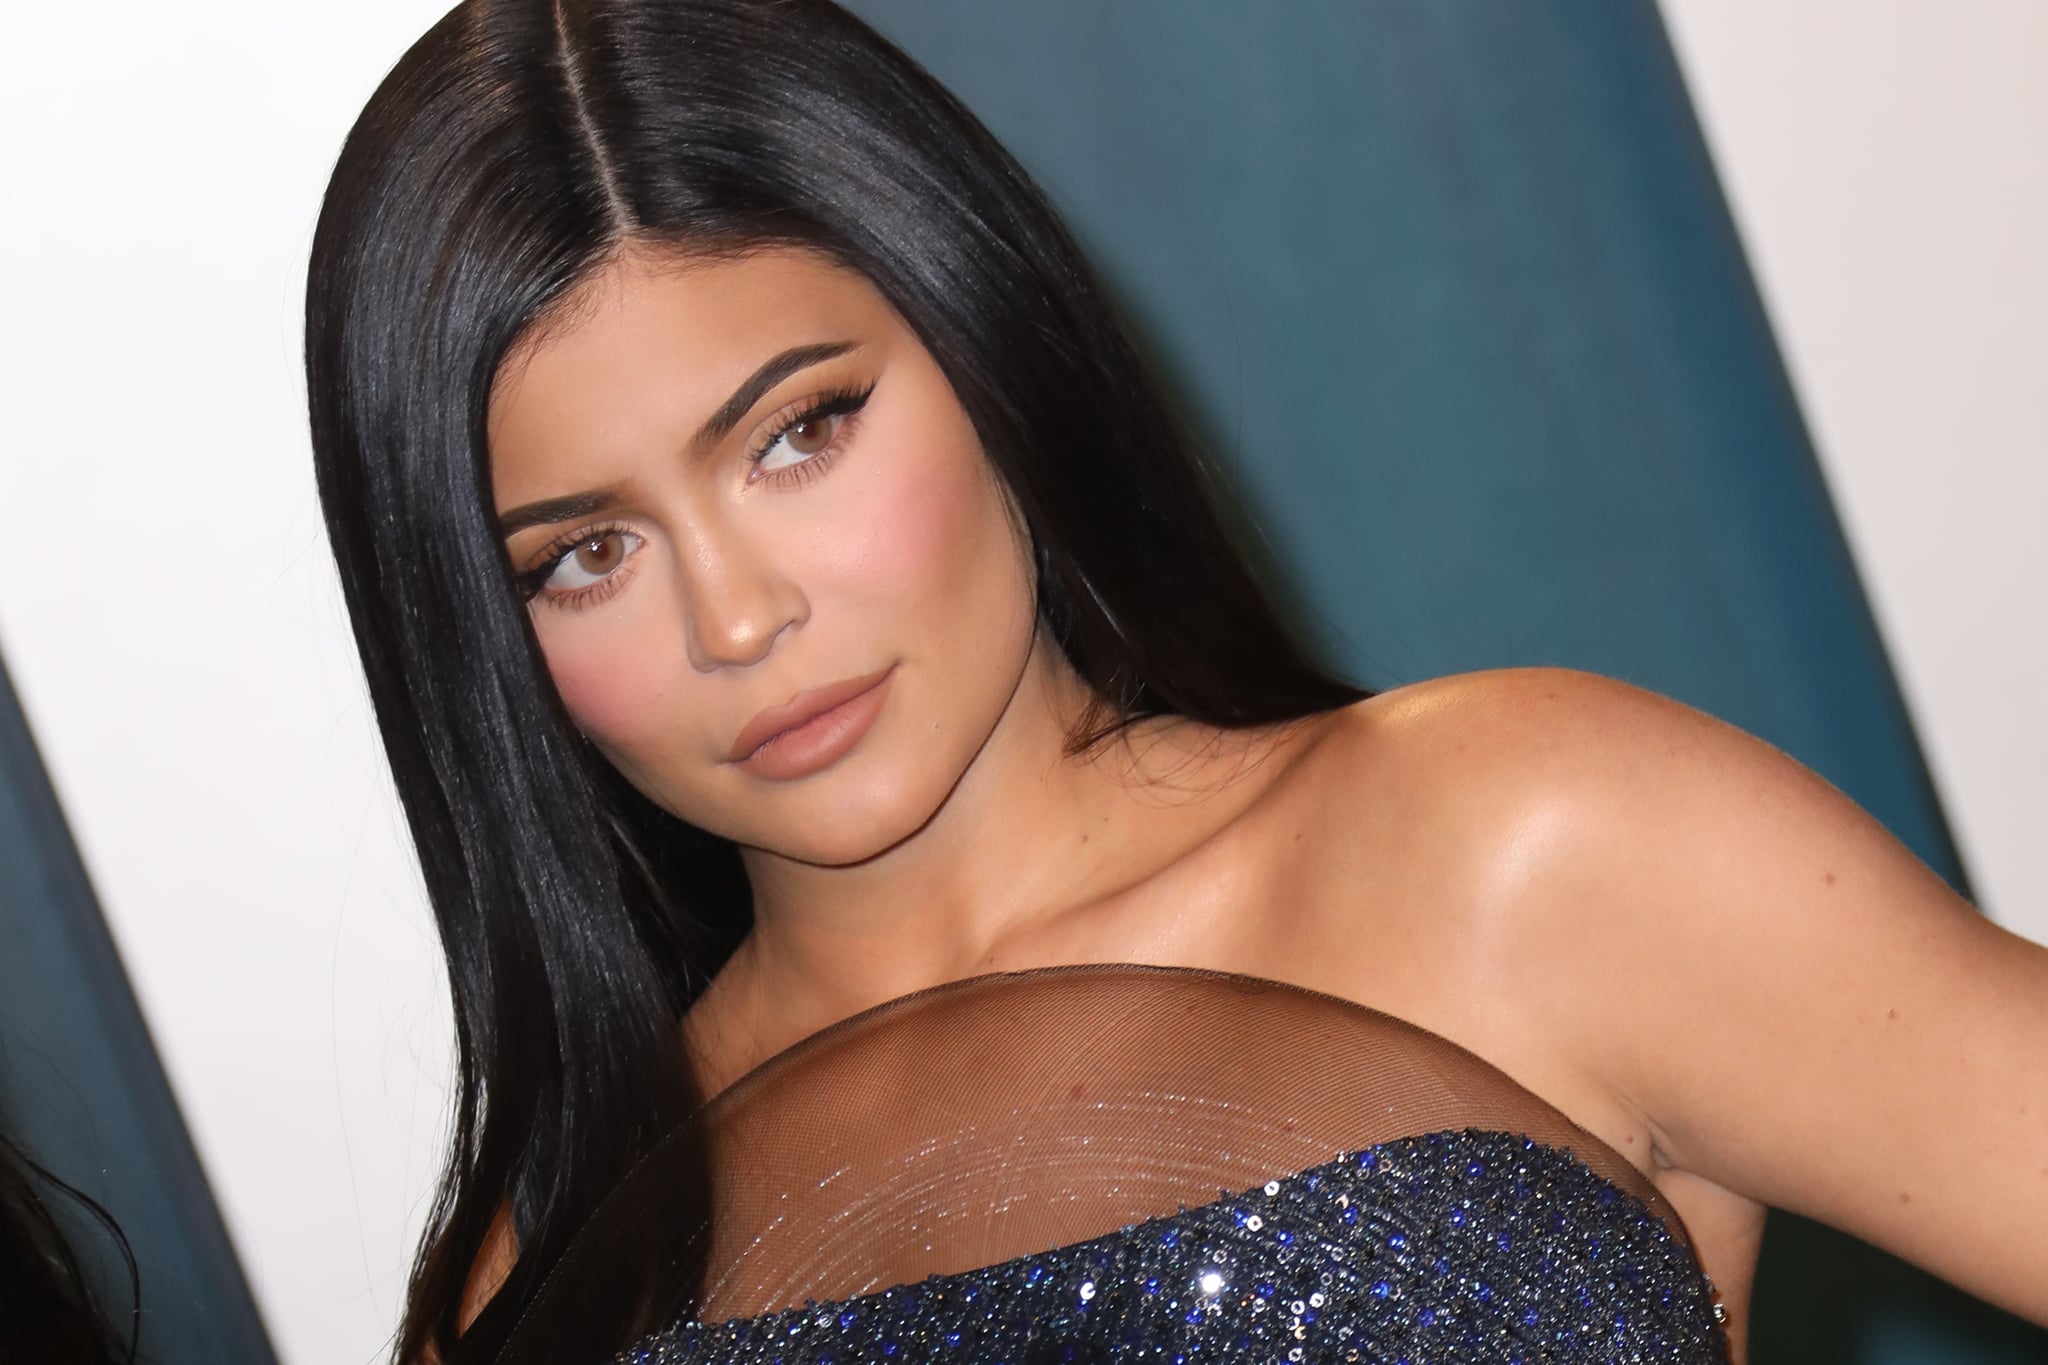 BEVERLY HILLS, CALIFORNIA - FEBRUARY 9: Kylie Jenner attends the 2020 Vanity Fair Oscar Party at the Wallis Annenberg Center for the Performing Arts on February 9, 2020 in Beverly Hills, California.  (Photo by Toni Anne Barson / WireImage)